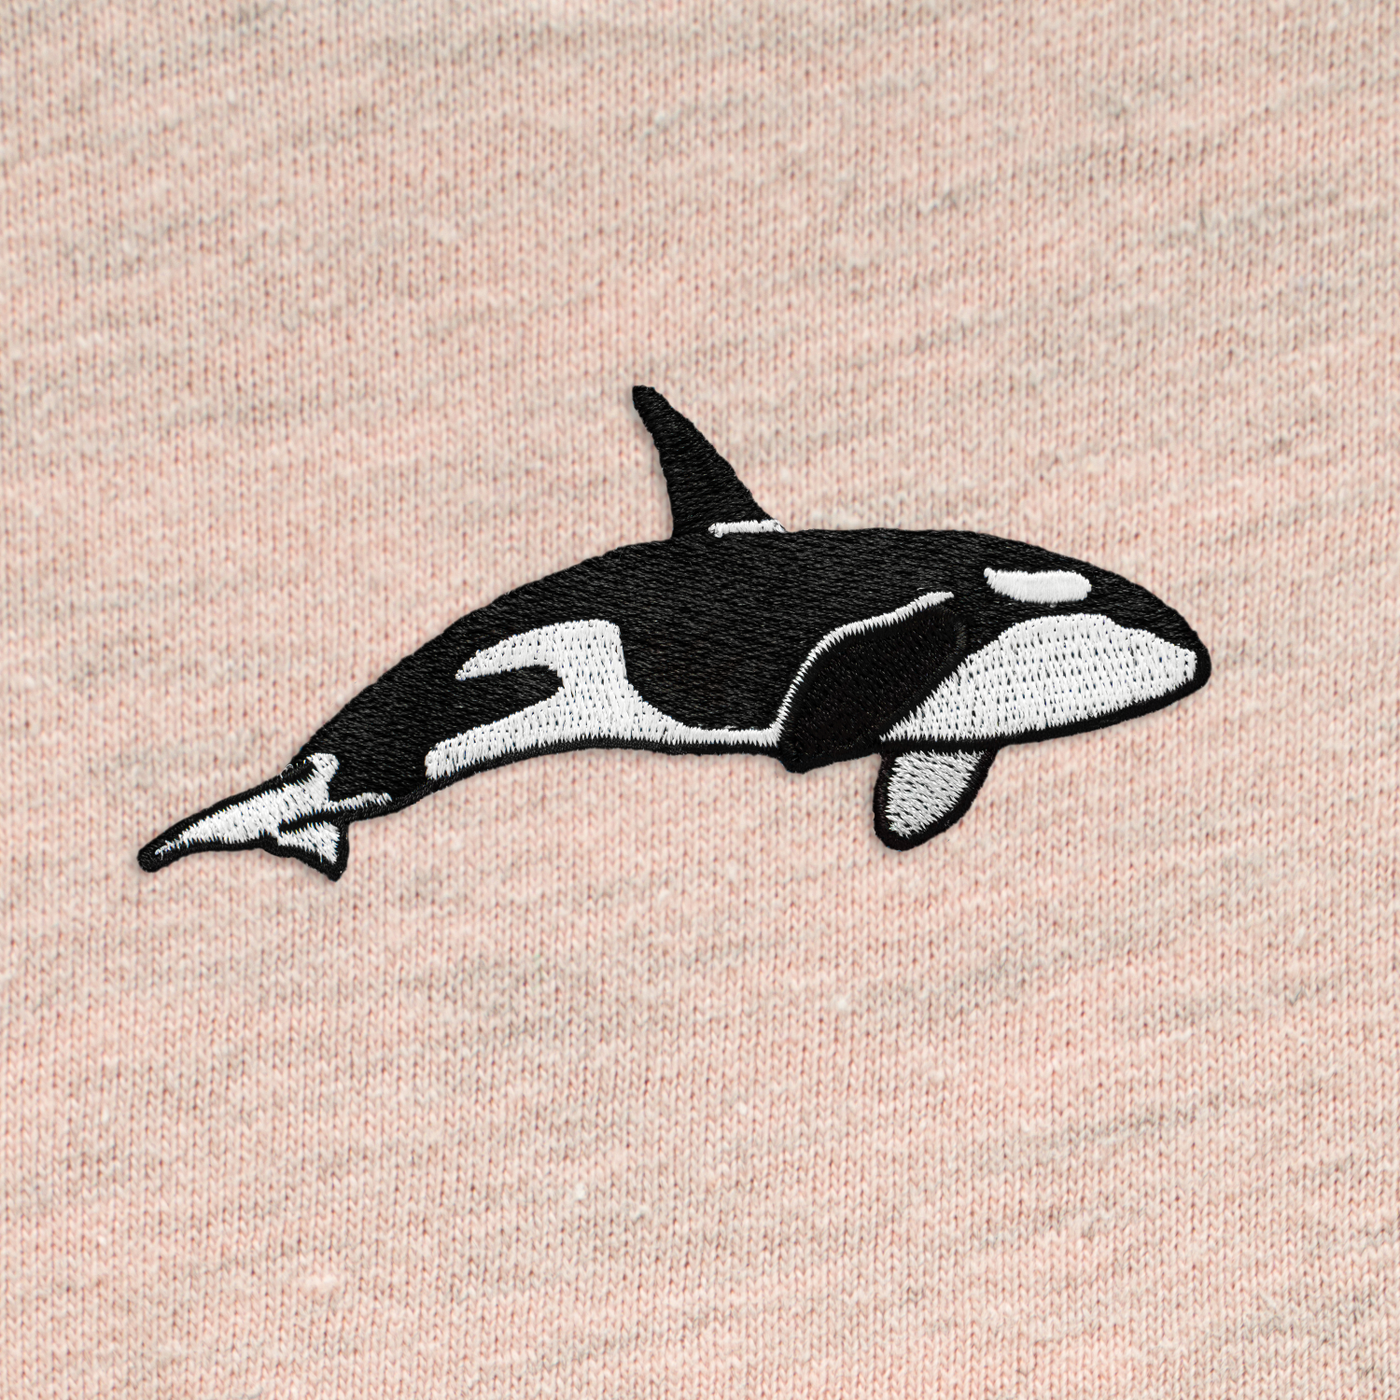 Bobby's Planet Women's Embroidered Orca T-Shirt from Seven Seas Fish Animals Collection in Heather Prism Peach Color#color_heather-prism-peach